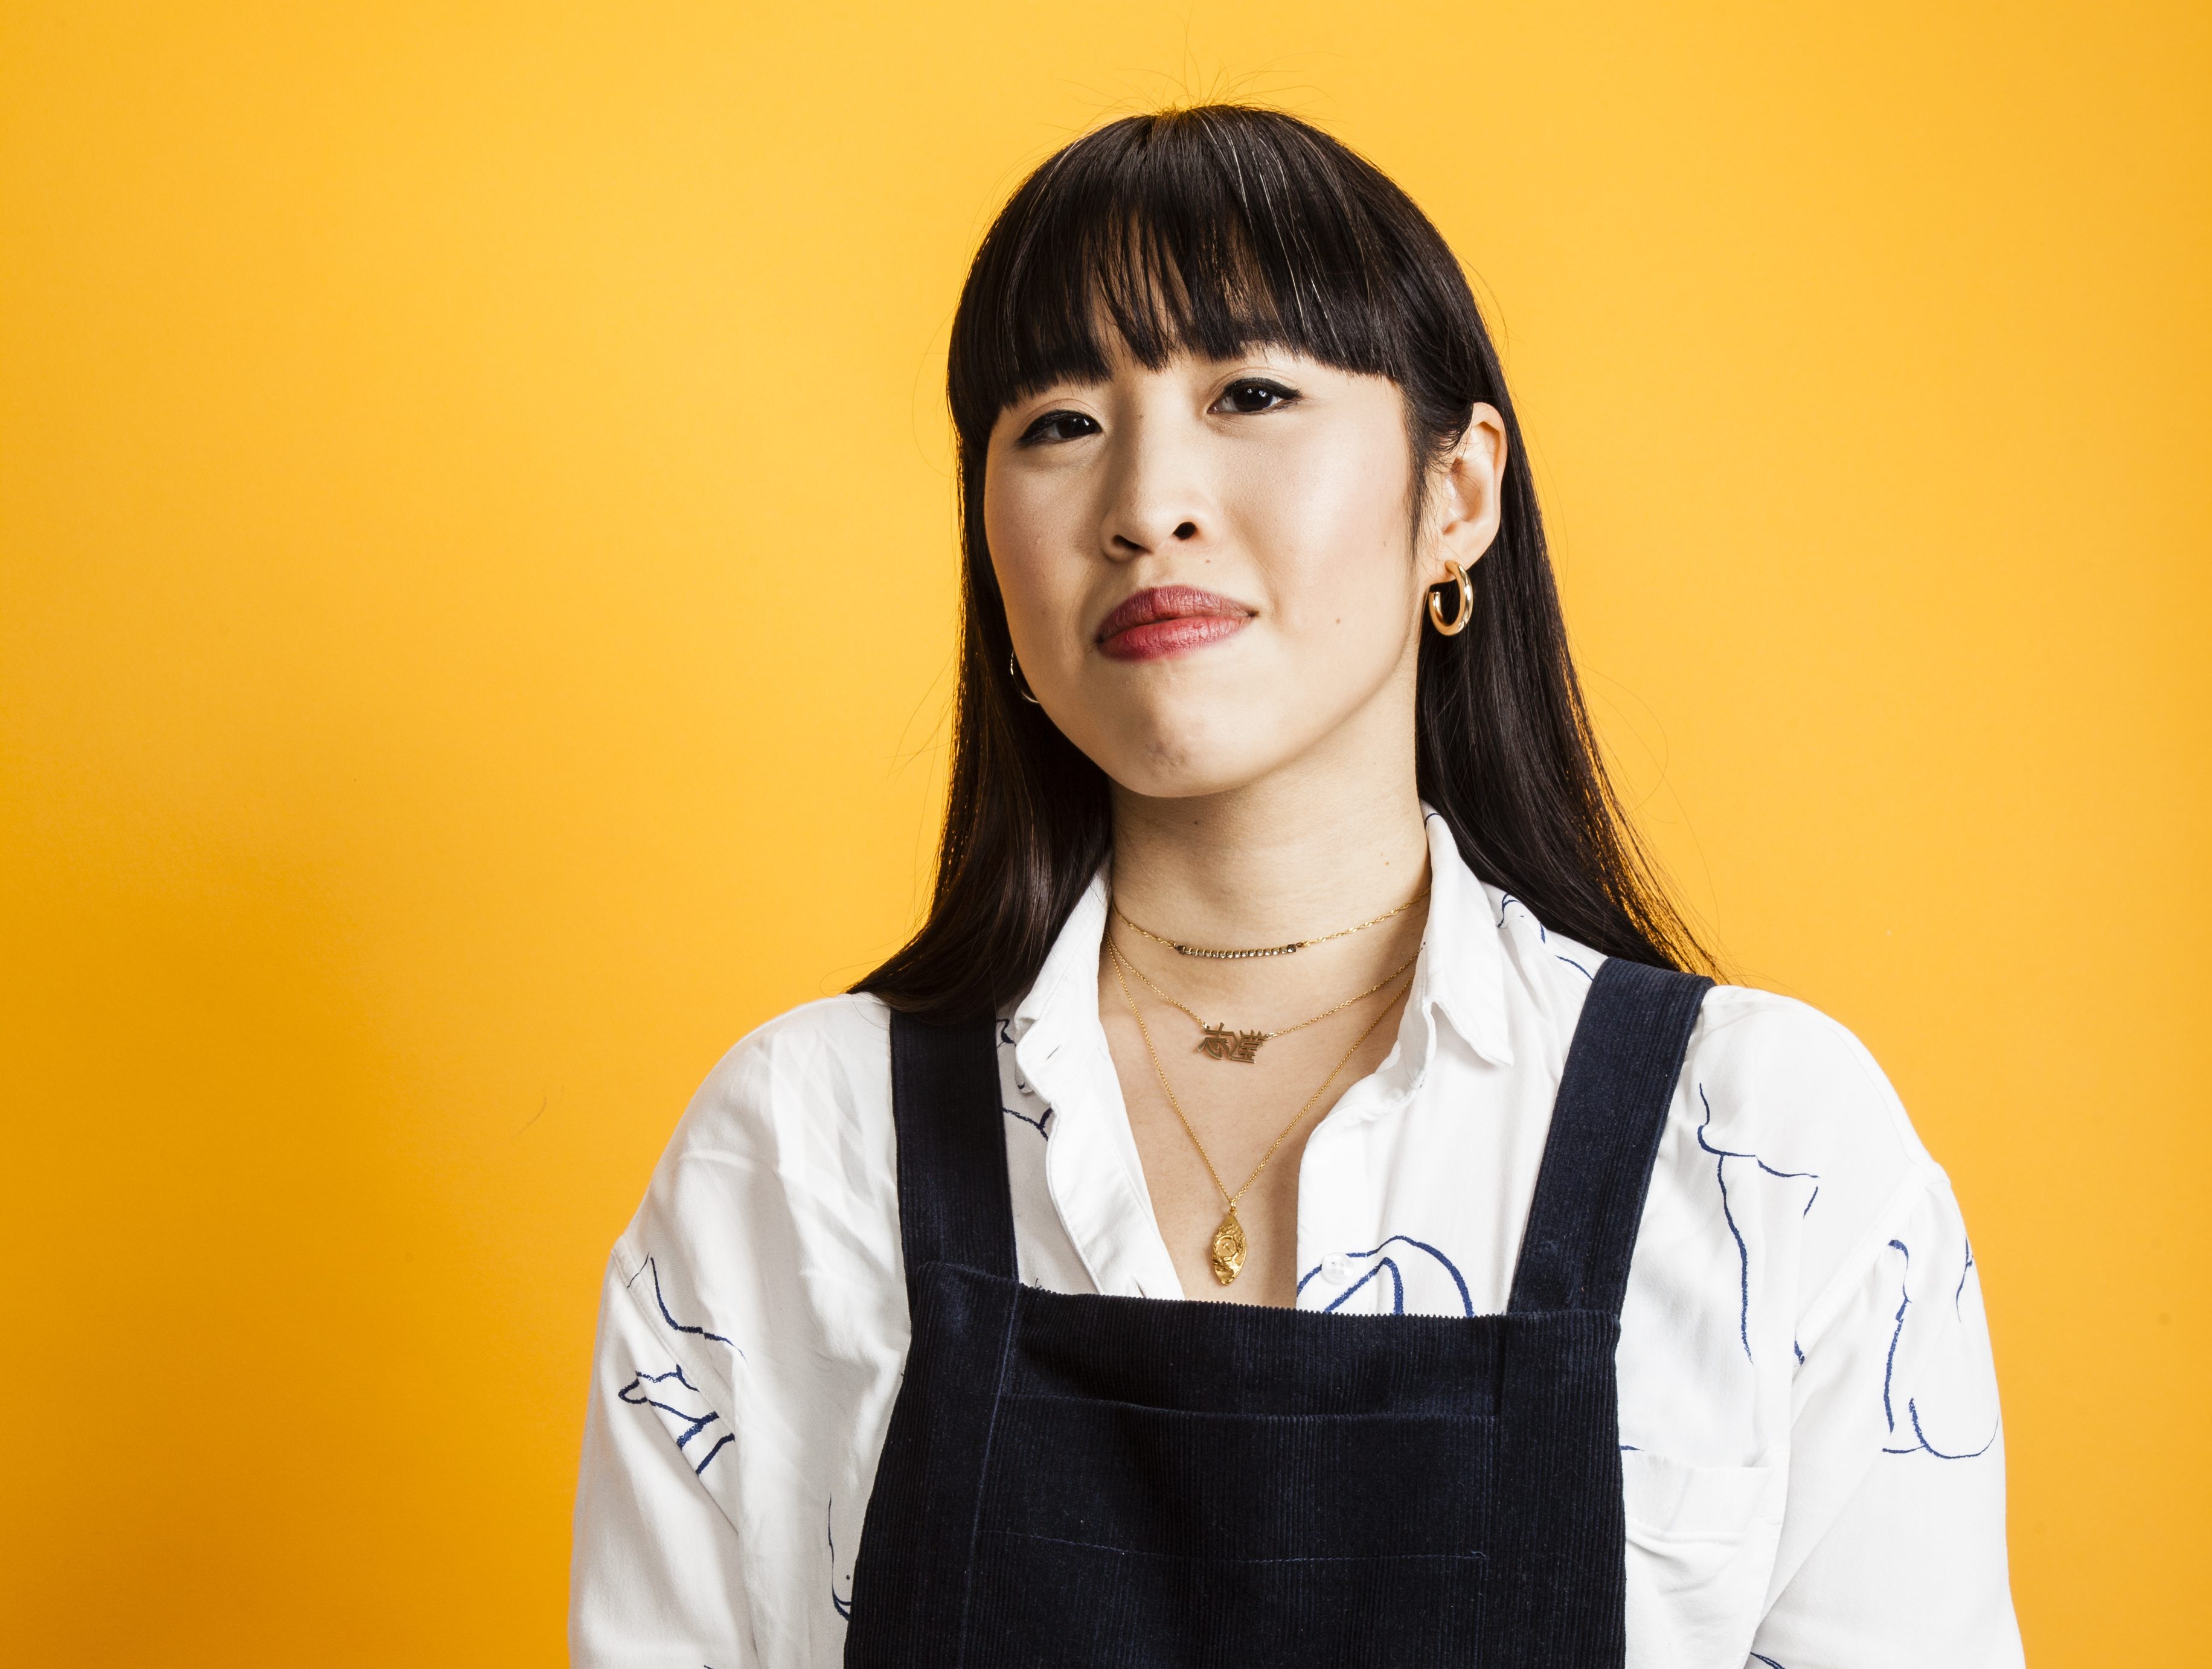 Zing Tsjeng is making sure women’s stories are never forgotten again